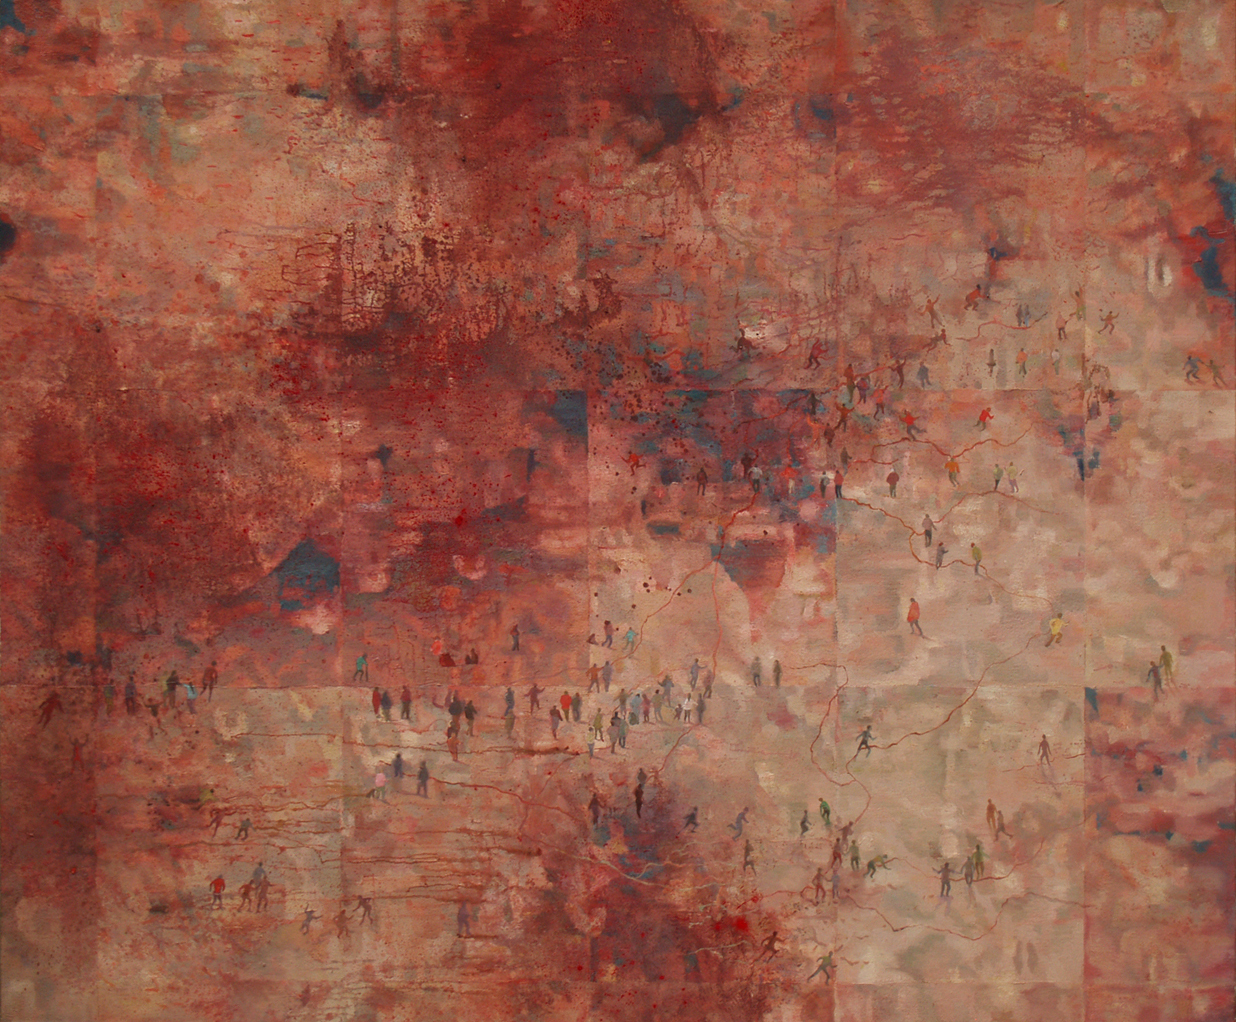 The game of unaware ones (Red moon carpet), 2013, oil on canvas, 160 x 190 cm